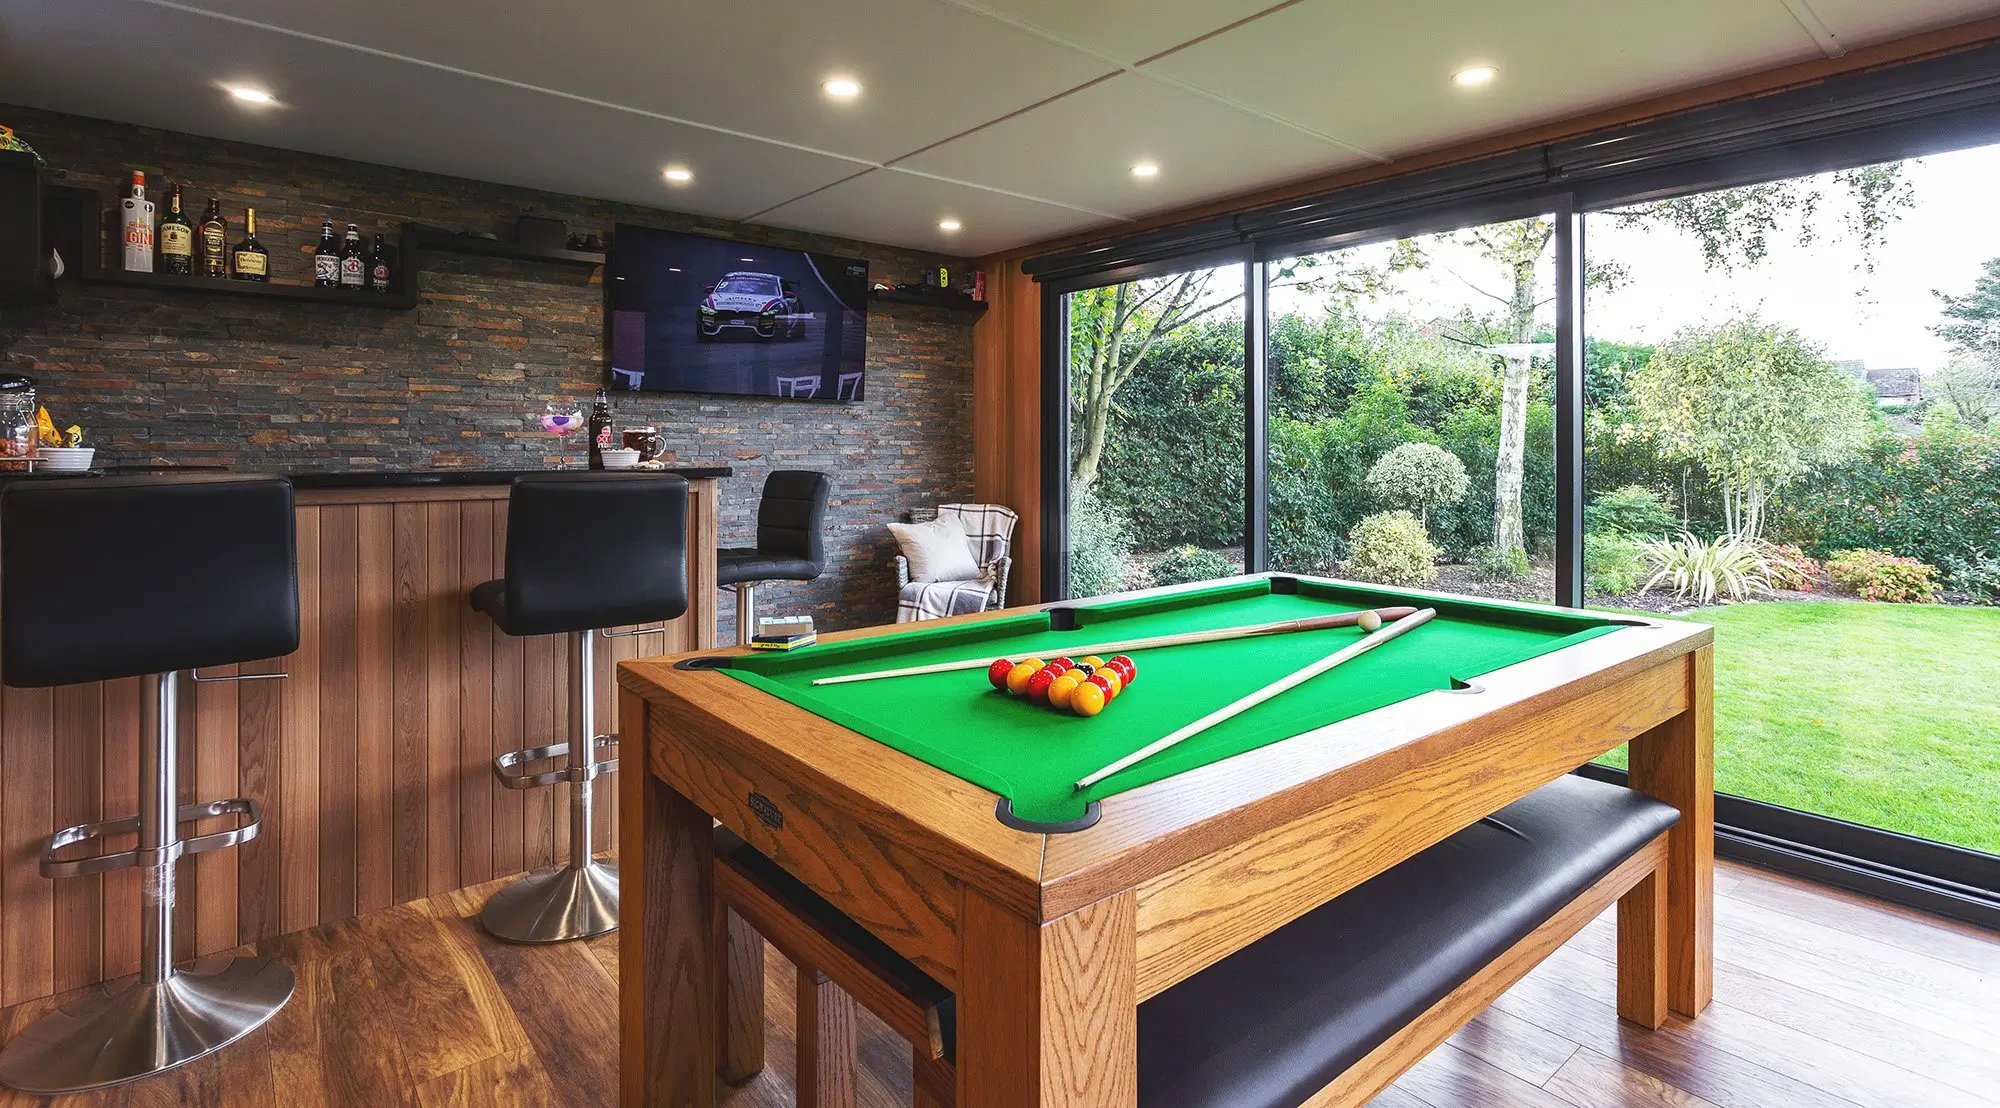 Interior of man cave garden shed with pool table